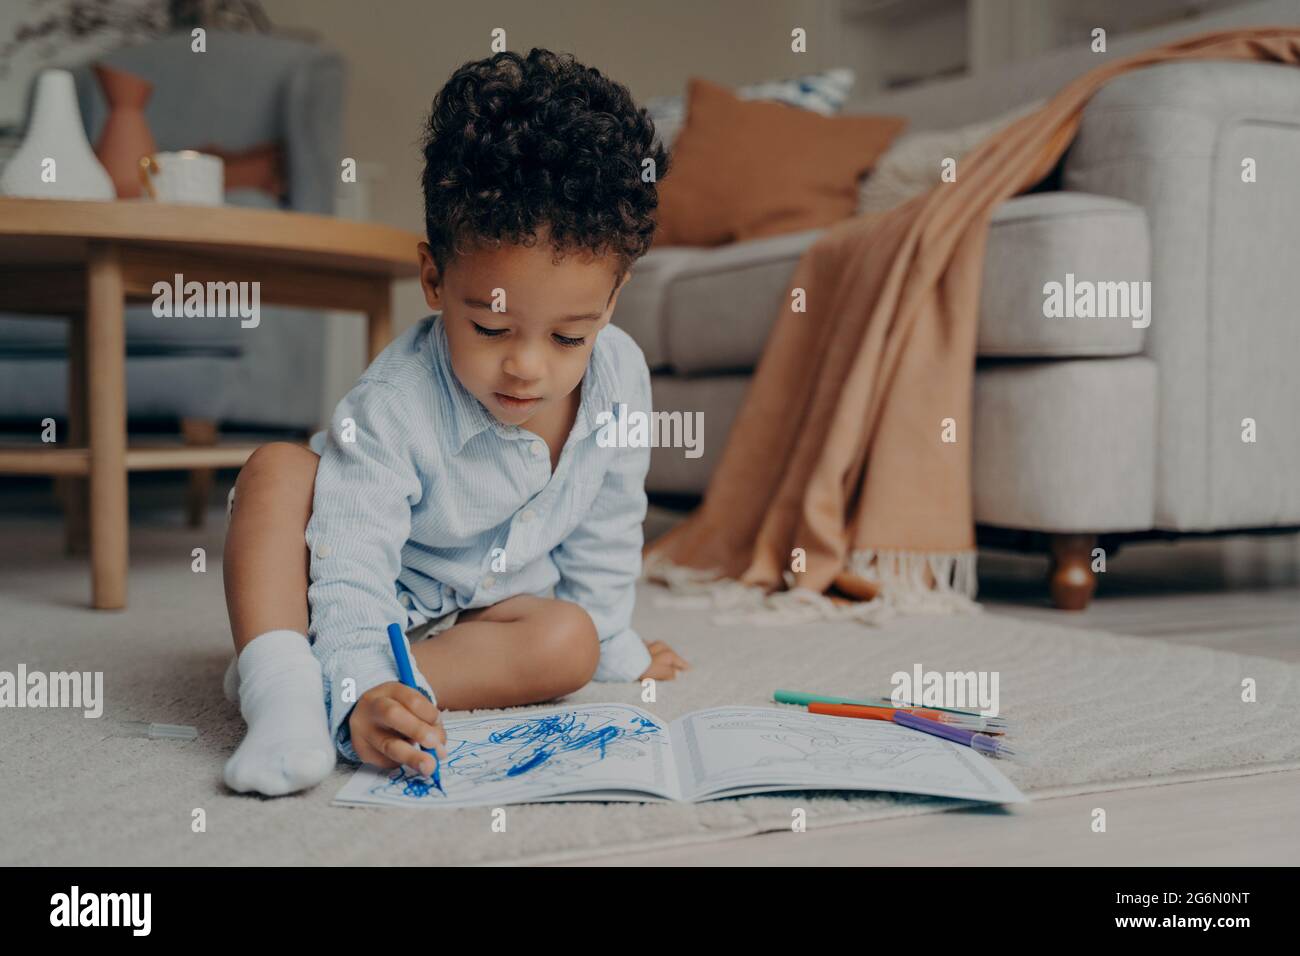 Small african baby boy sitting on floor and drawing with blue felt tip pen Stock Photo